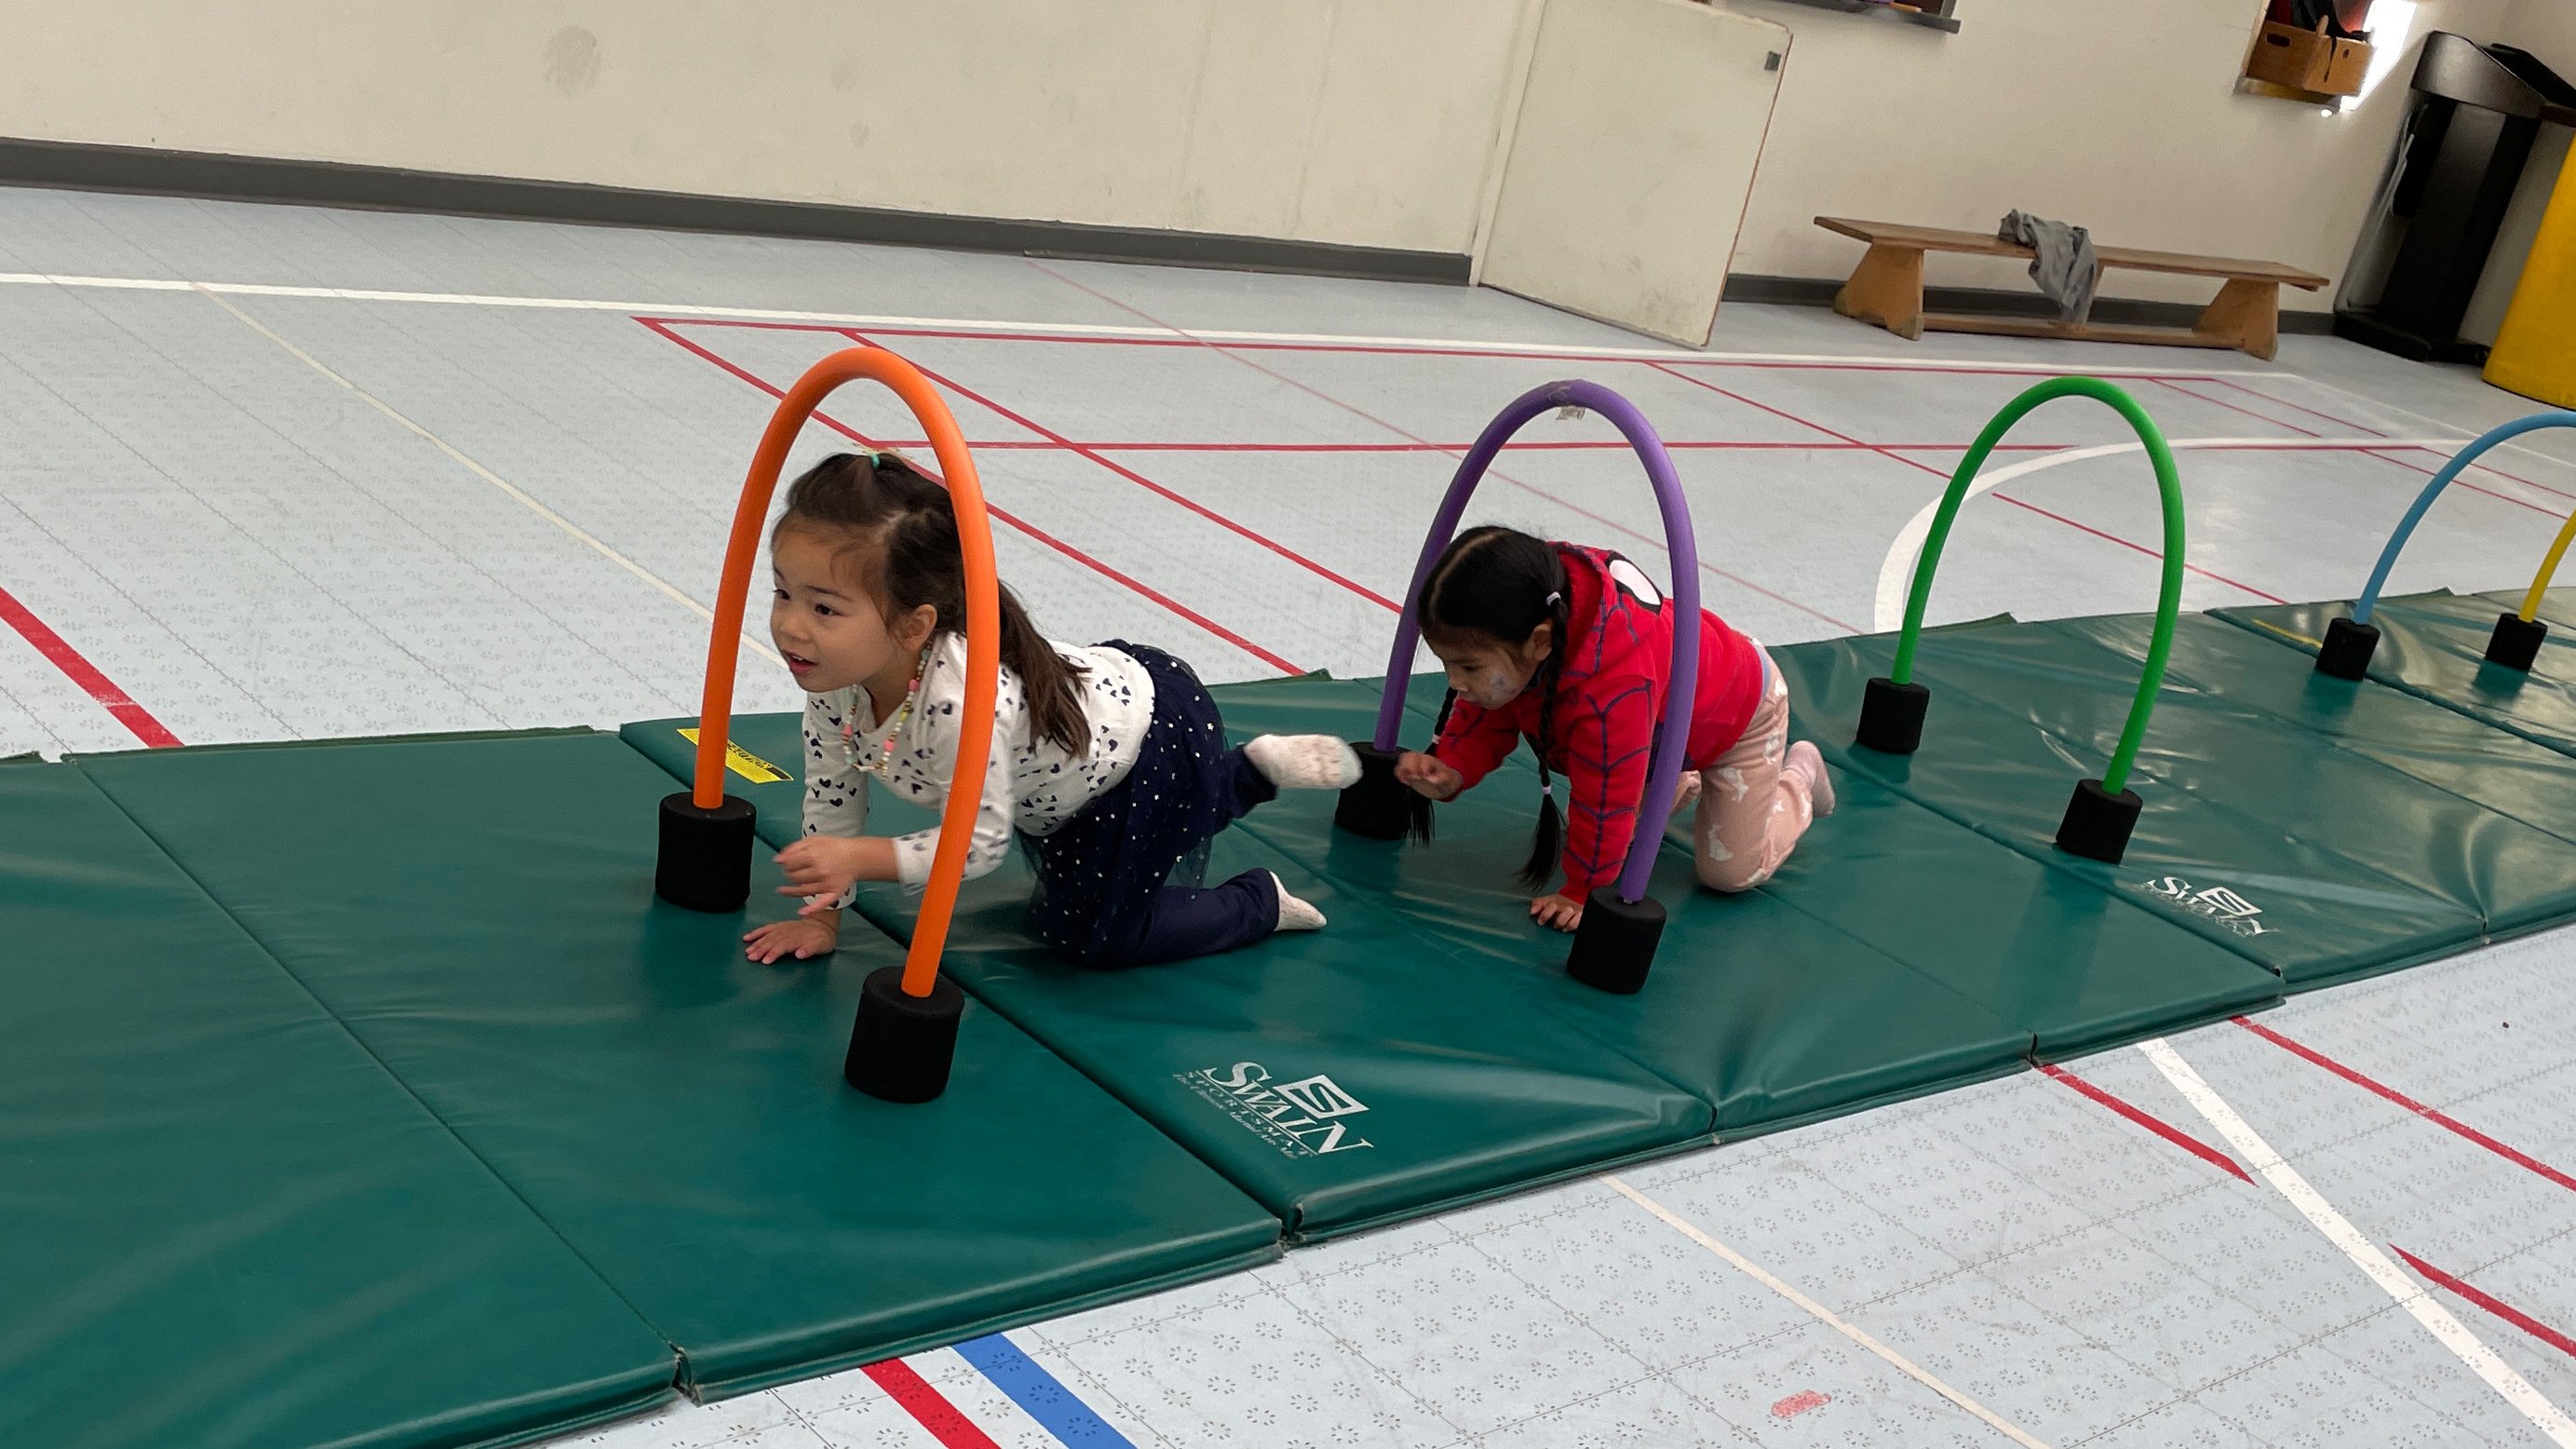 Early Years students discover movement skills through play.